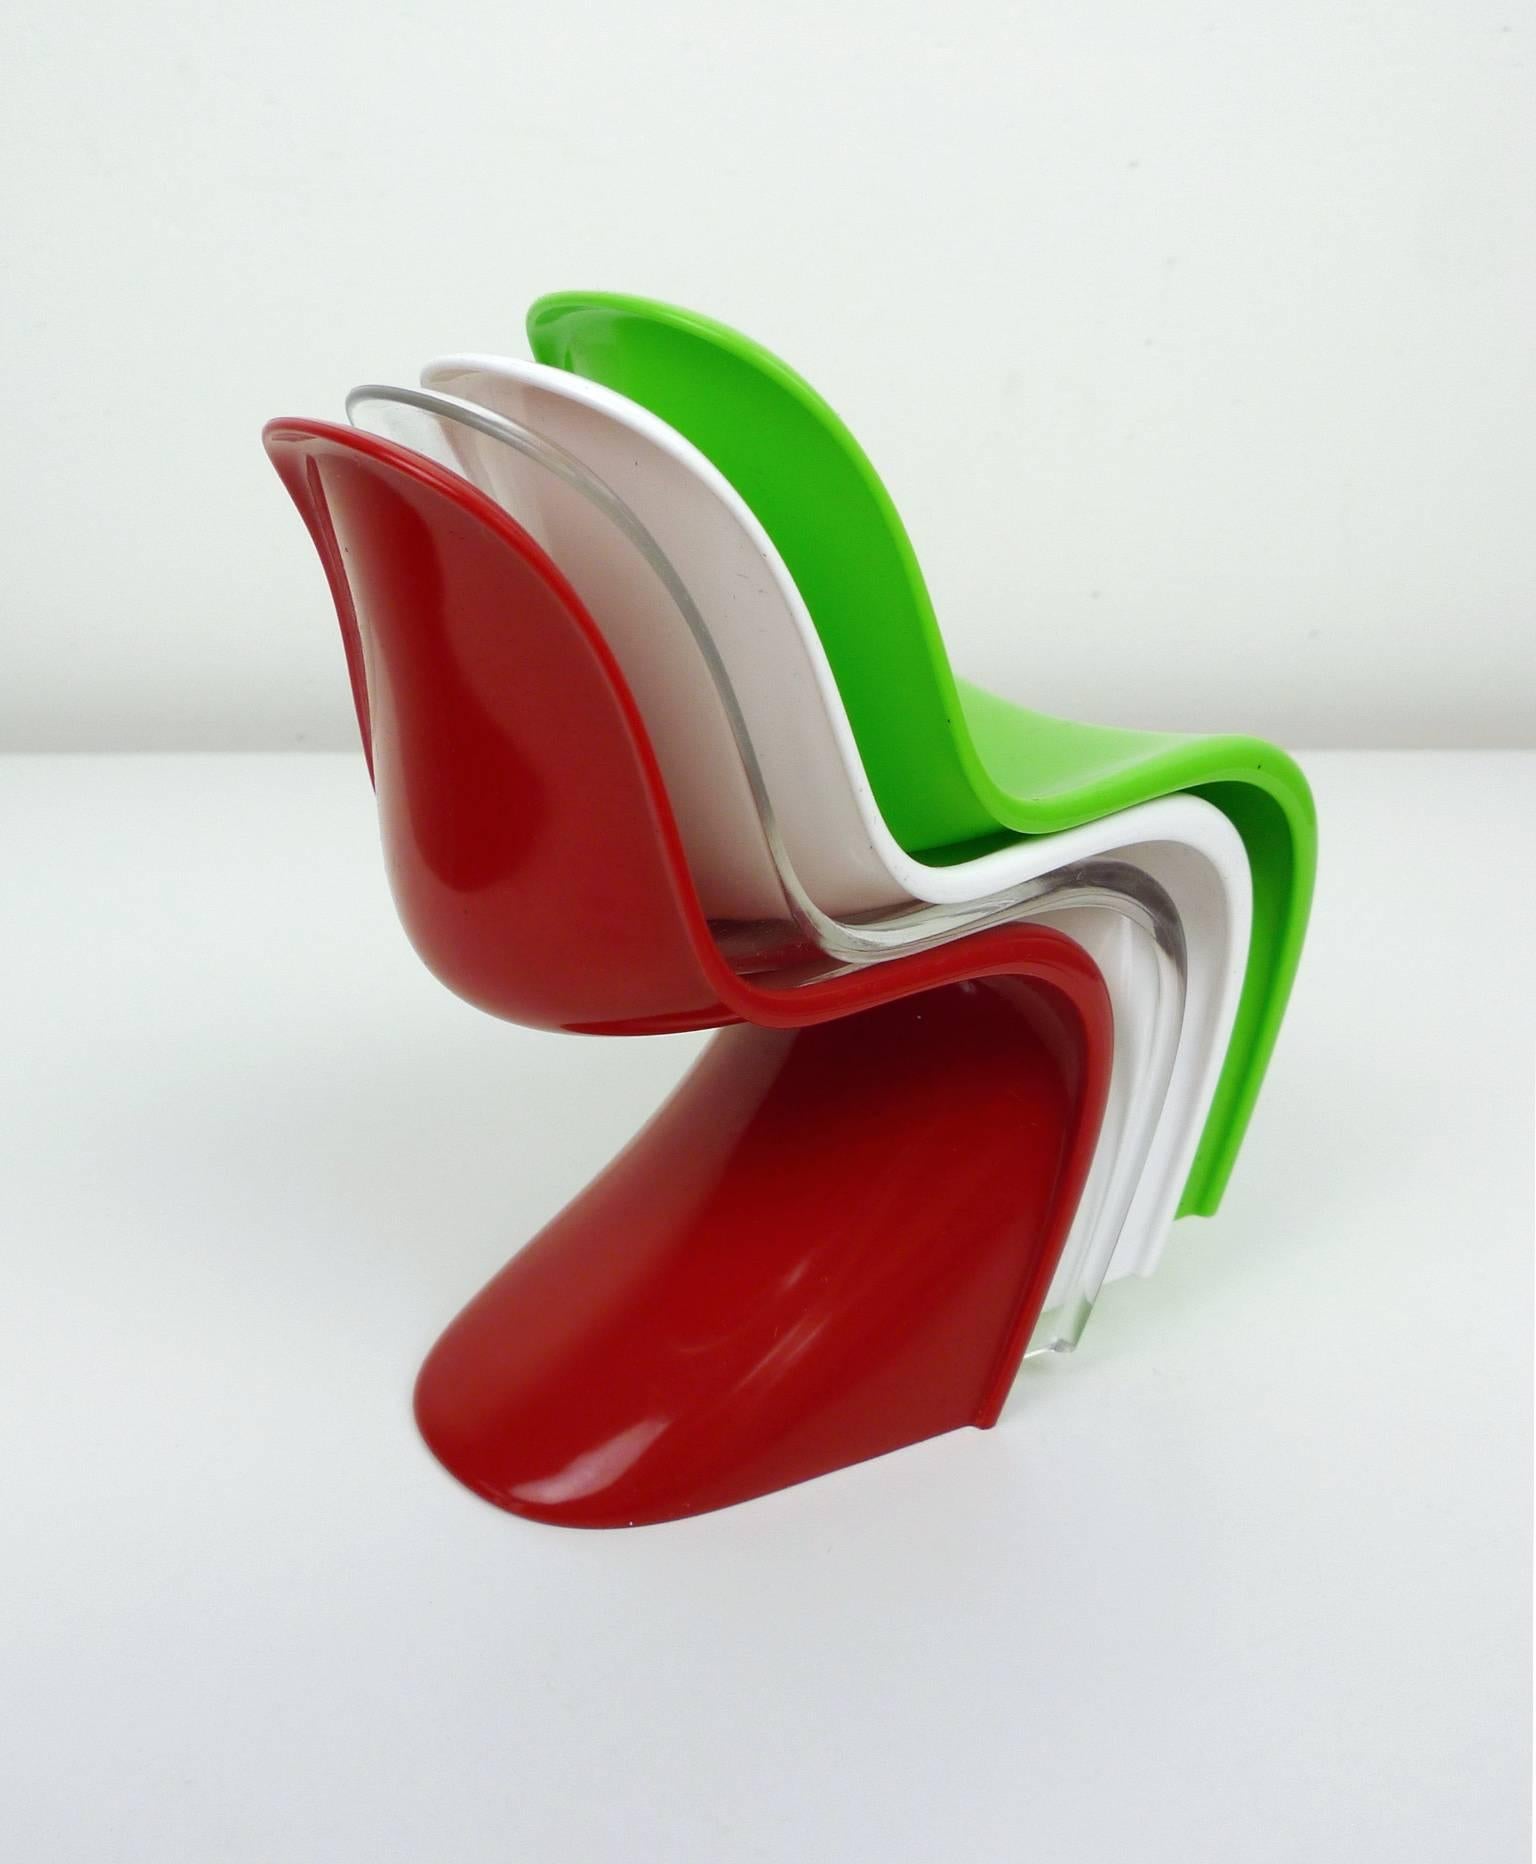 Set of Four Miniature Panton Chairs from Germany, 1970s For Sale 1